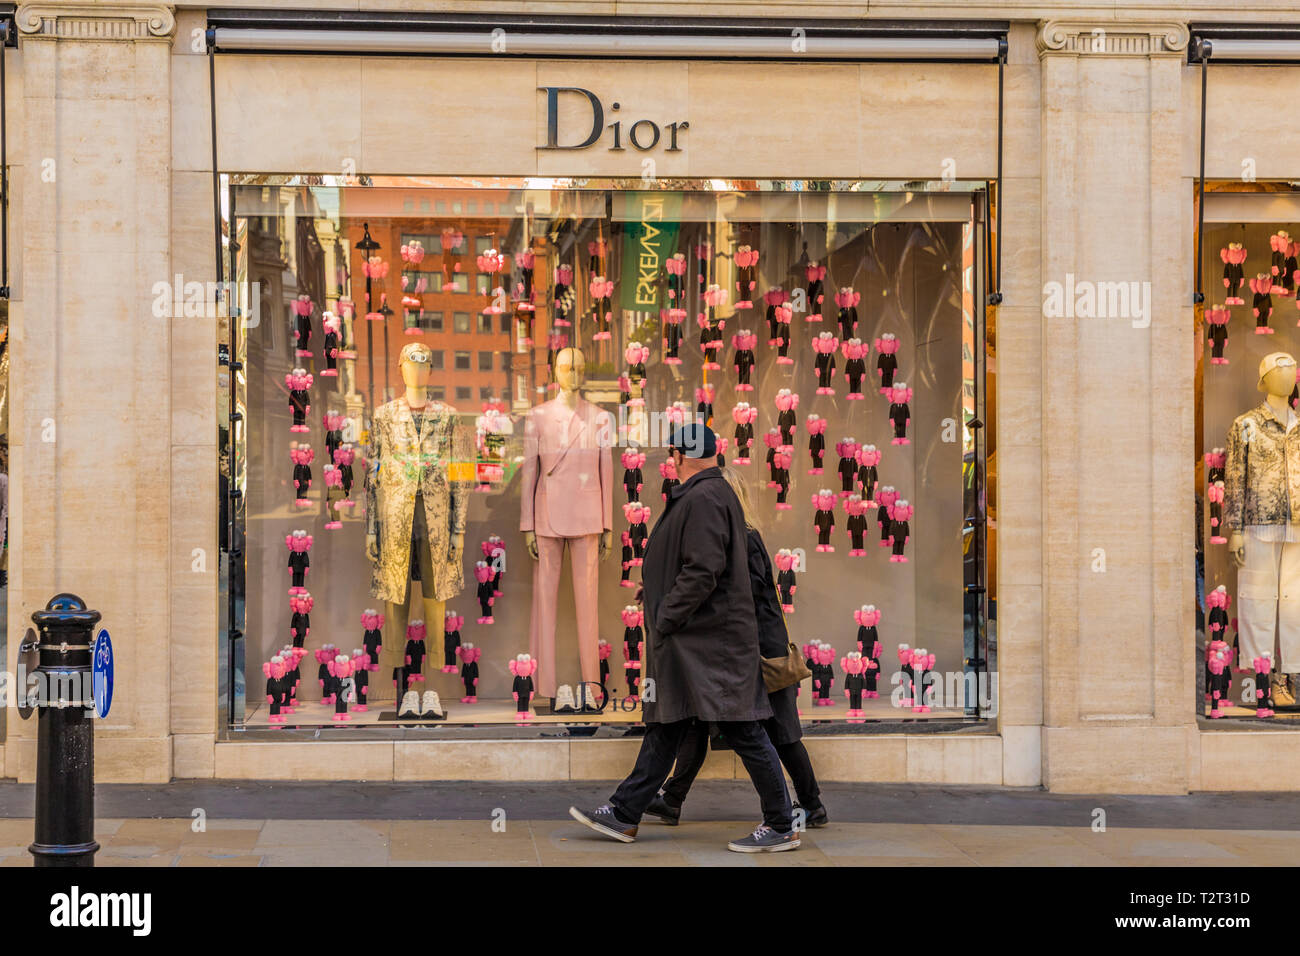 April 2019. London. A view of the Dior store on Bond street in london ...